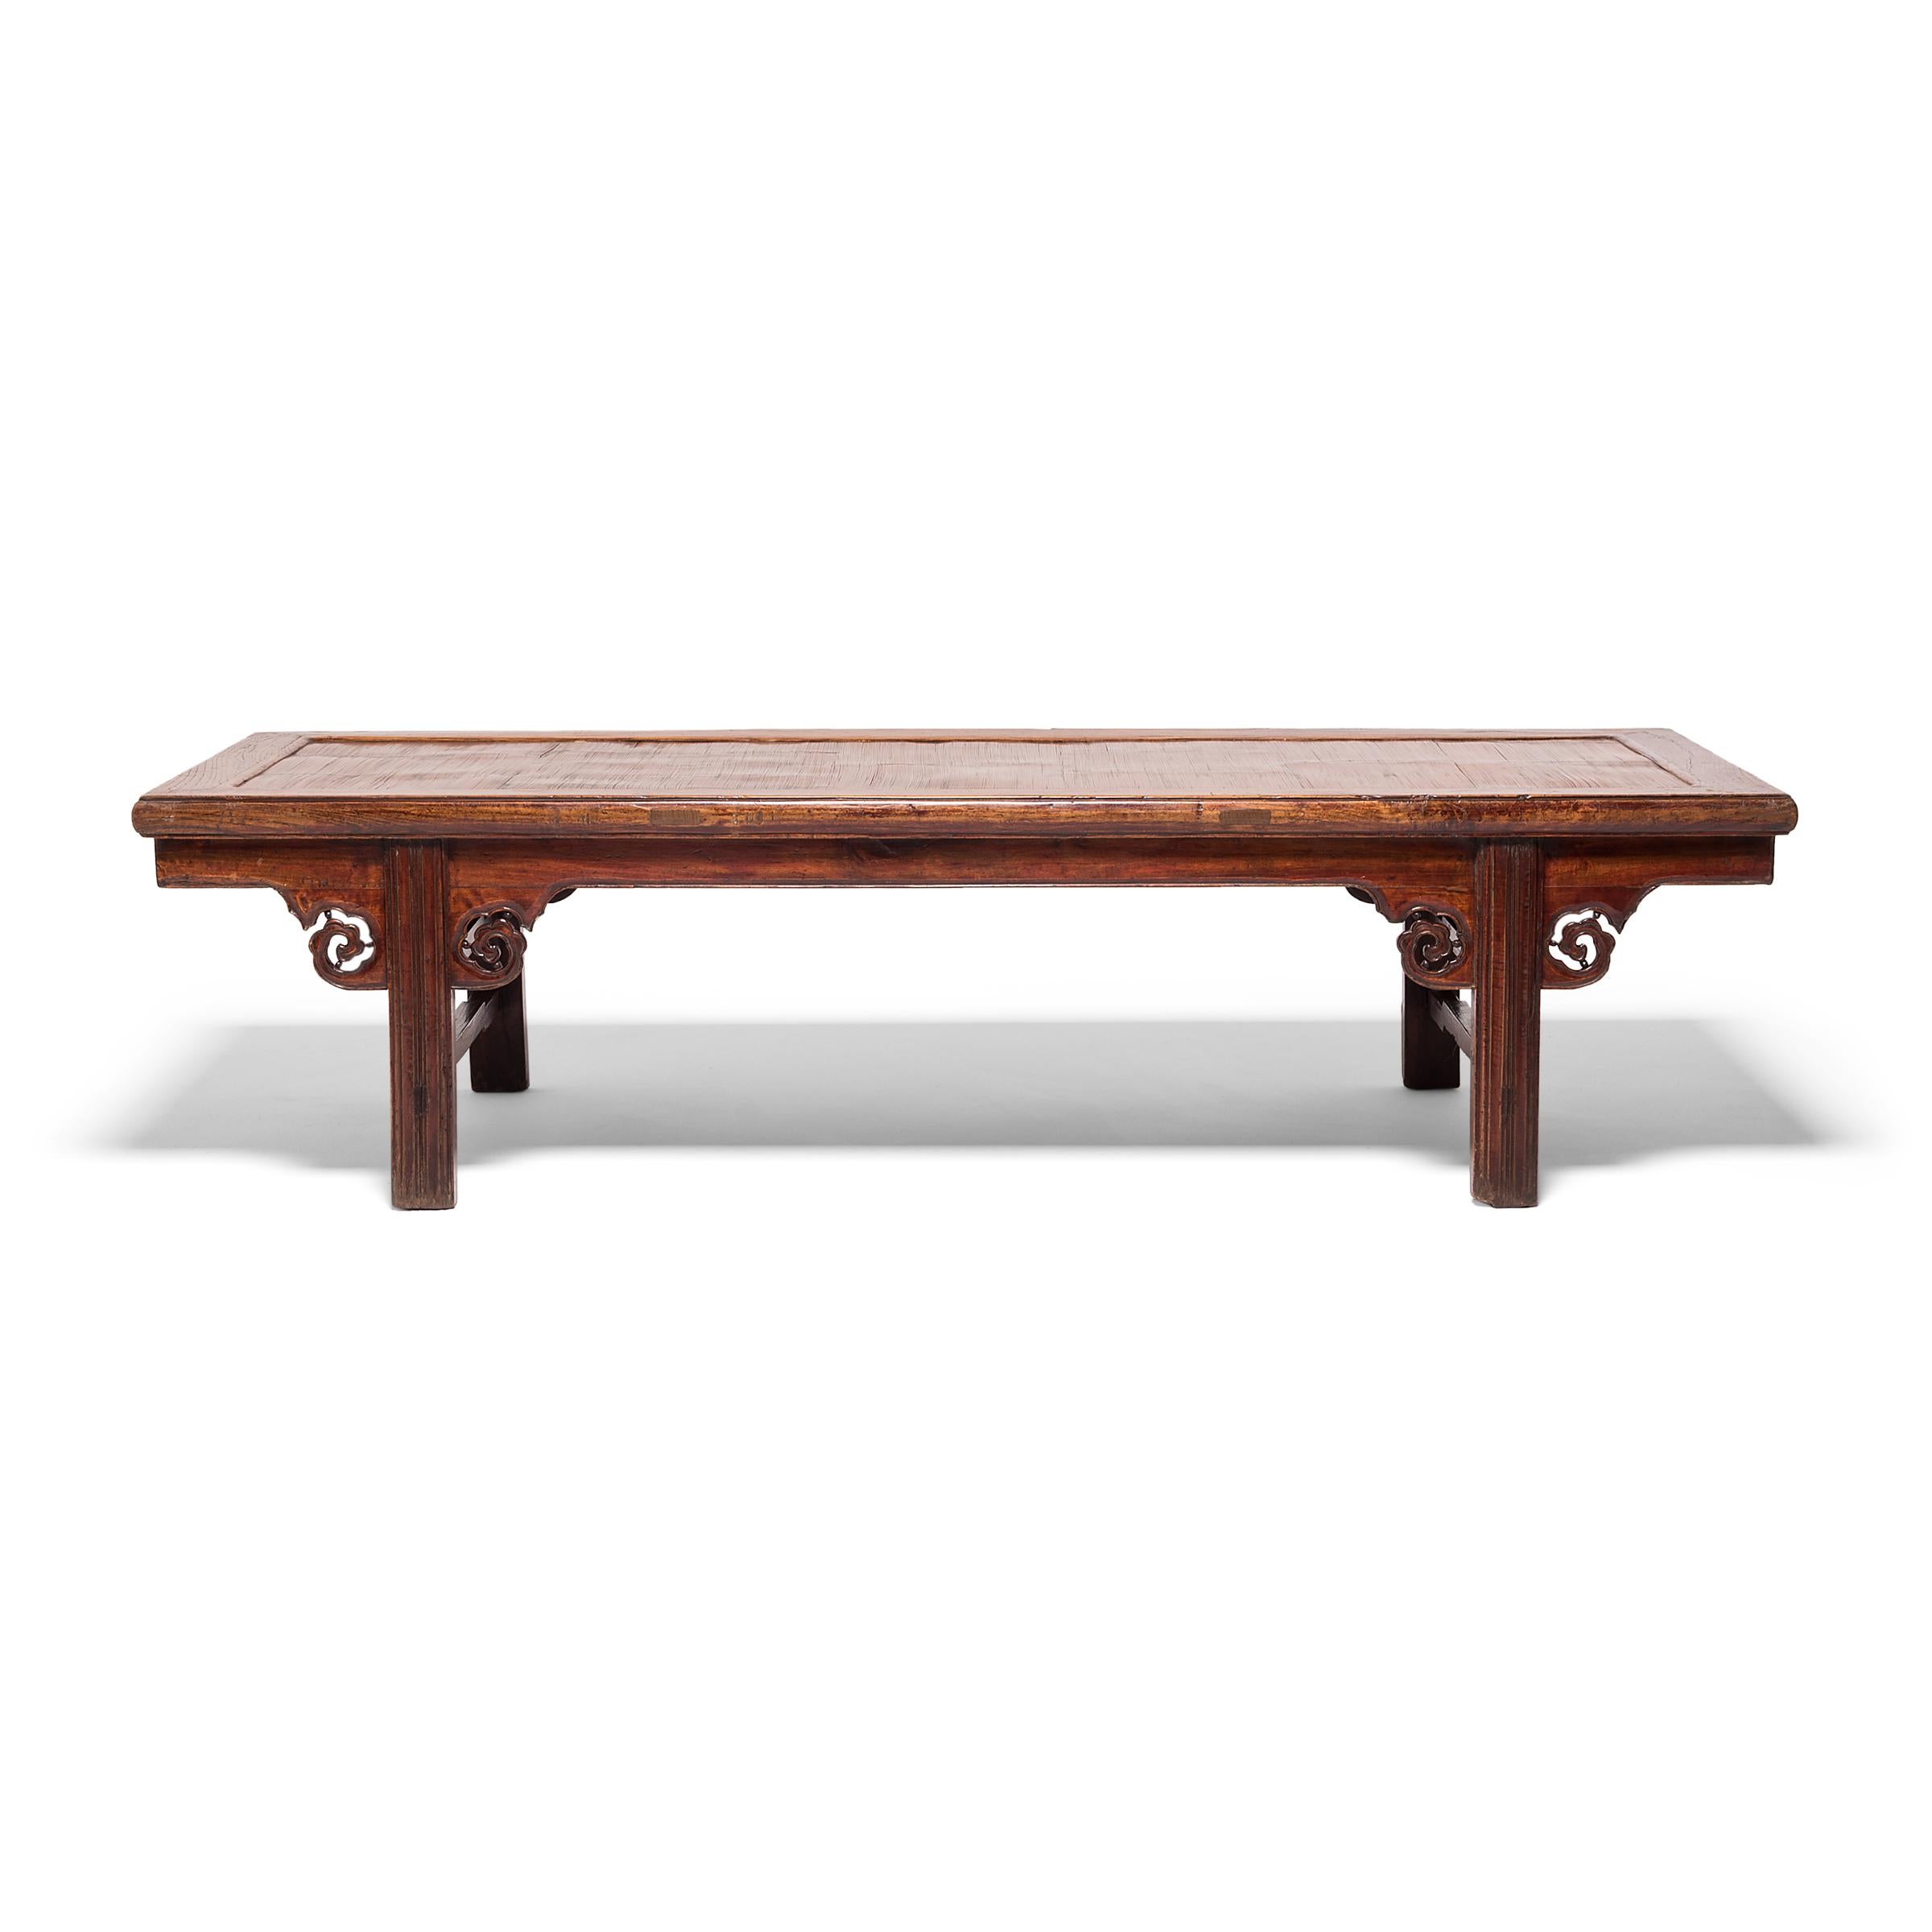 Traditionally, a low table such as this would have been used as a daybed, providing not only a place to sleep but also a space to drink tea, play a game, or share an intimate moment. Built in the mid-19th century, this elmwood table was likely